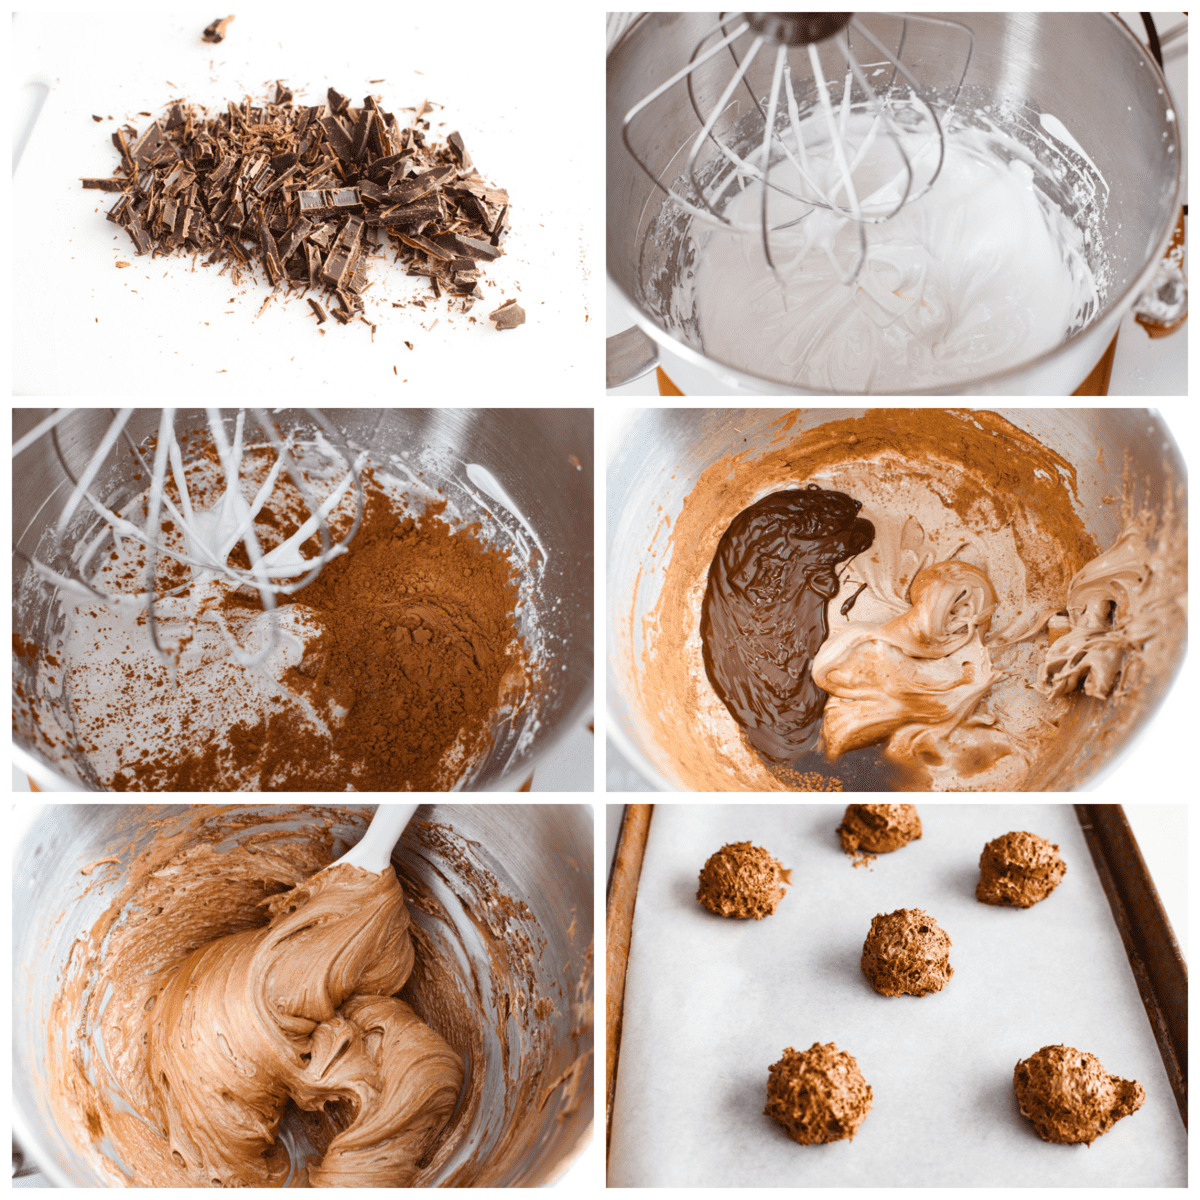 6 pictures in a collage showing how to make the batter. 